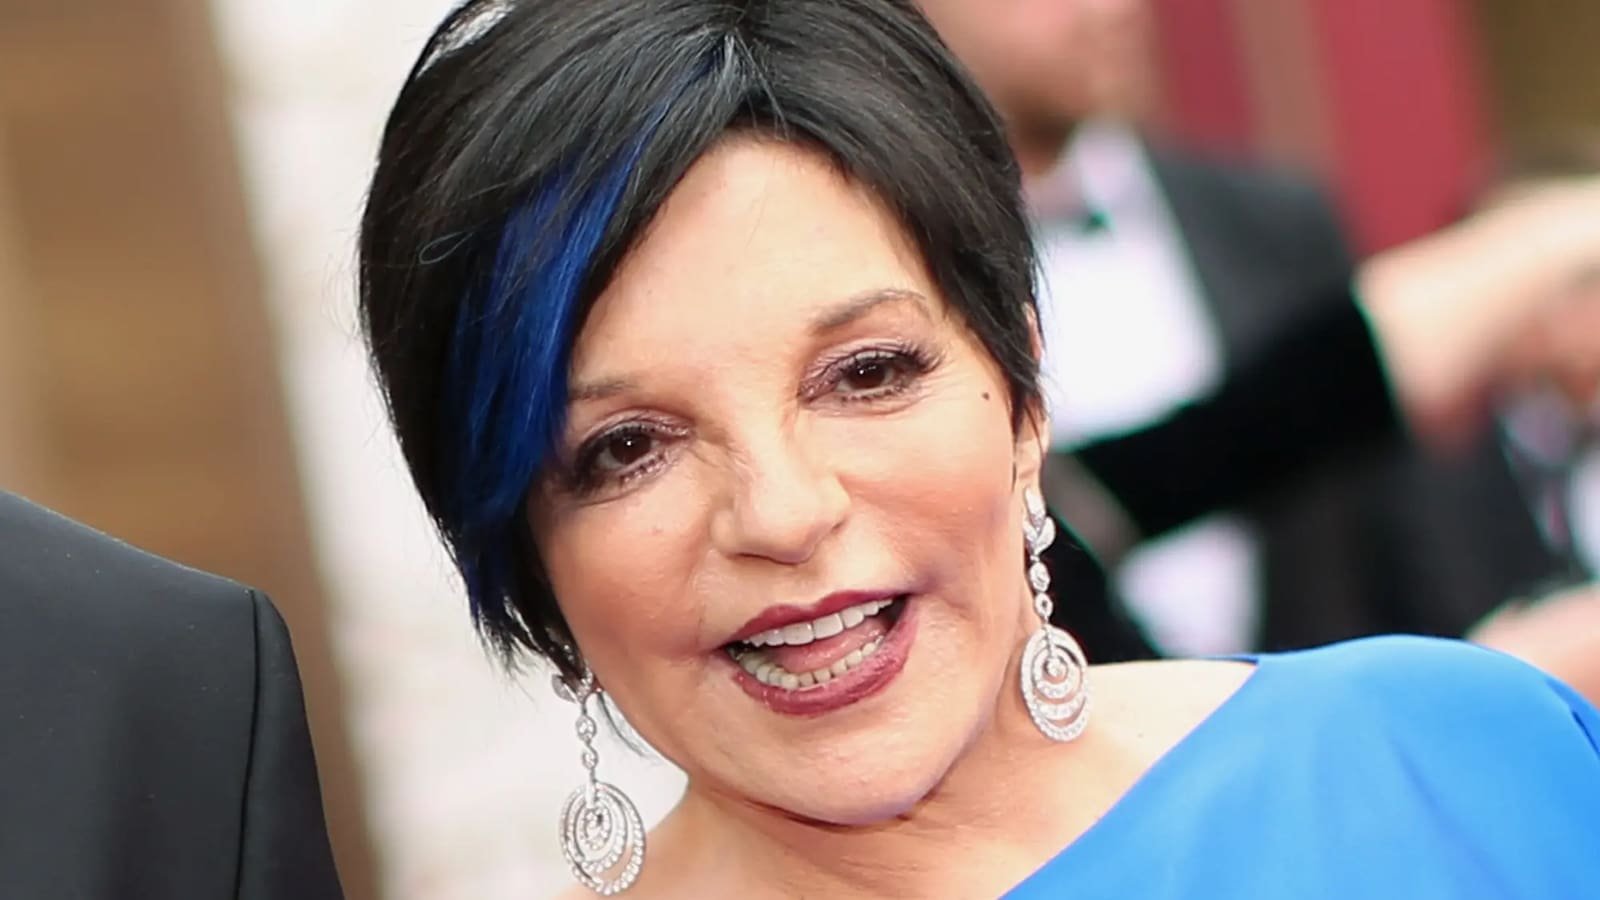 Liza Minnelli Biography Net Worth, Career, Early Life and Facts